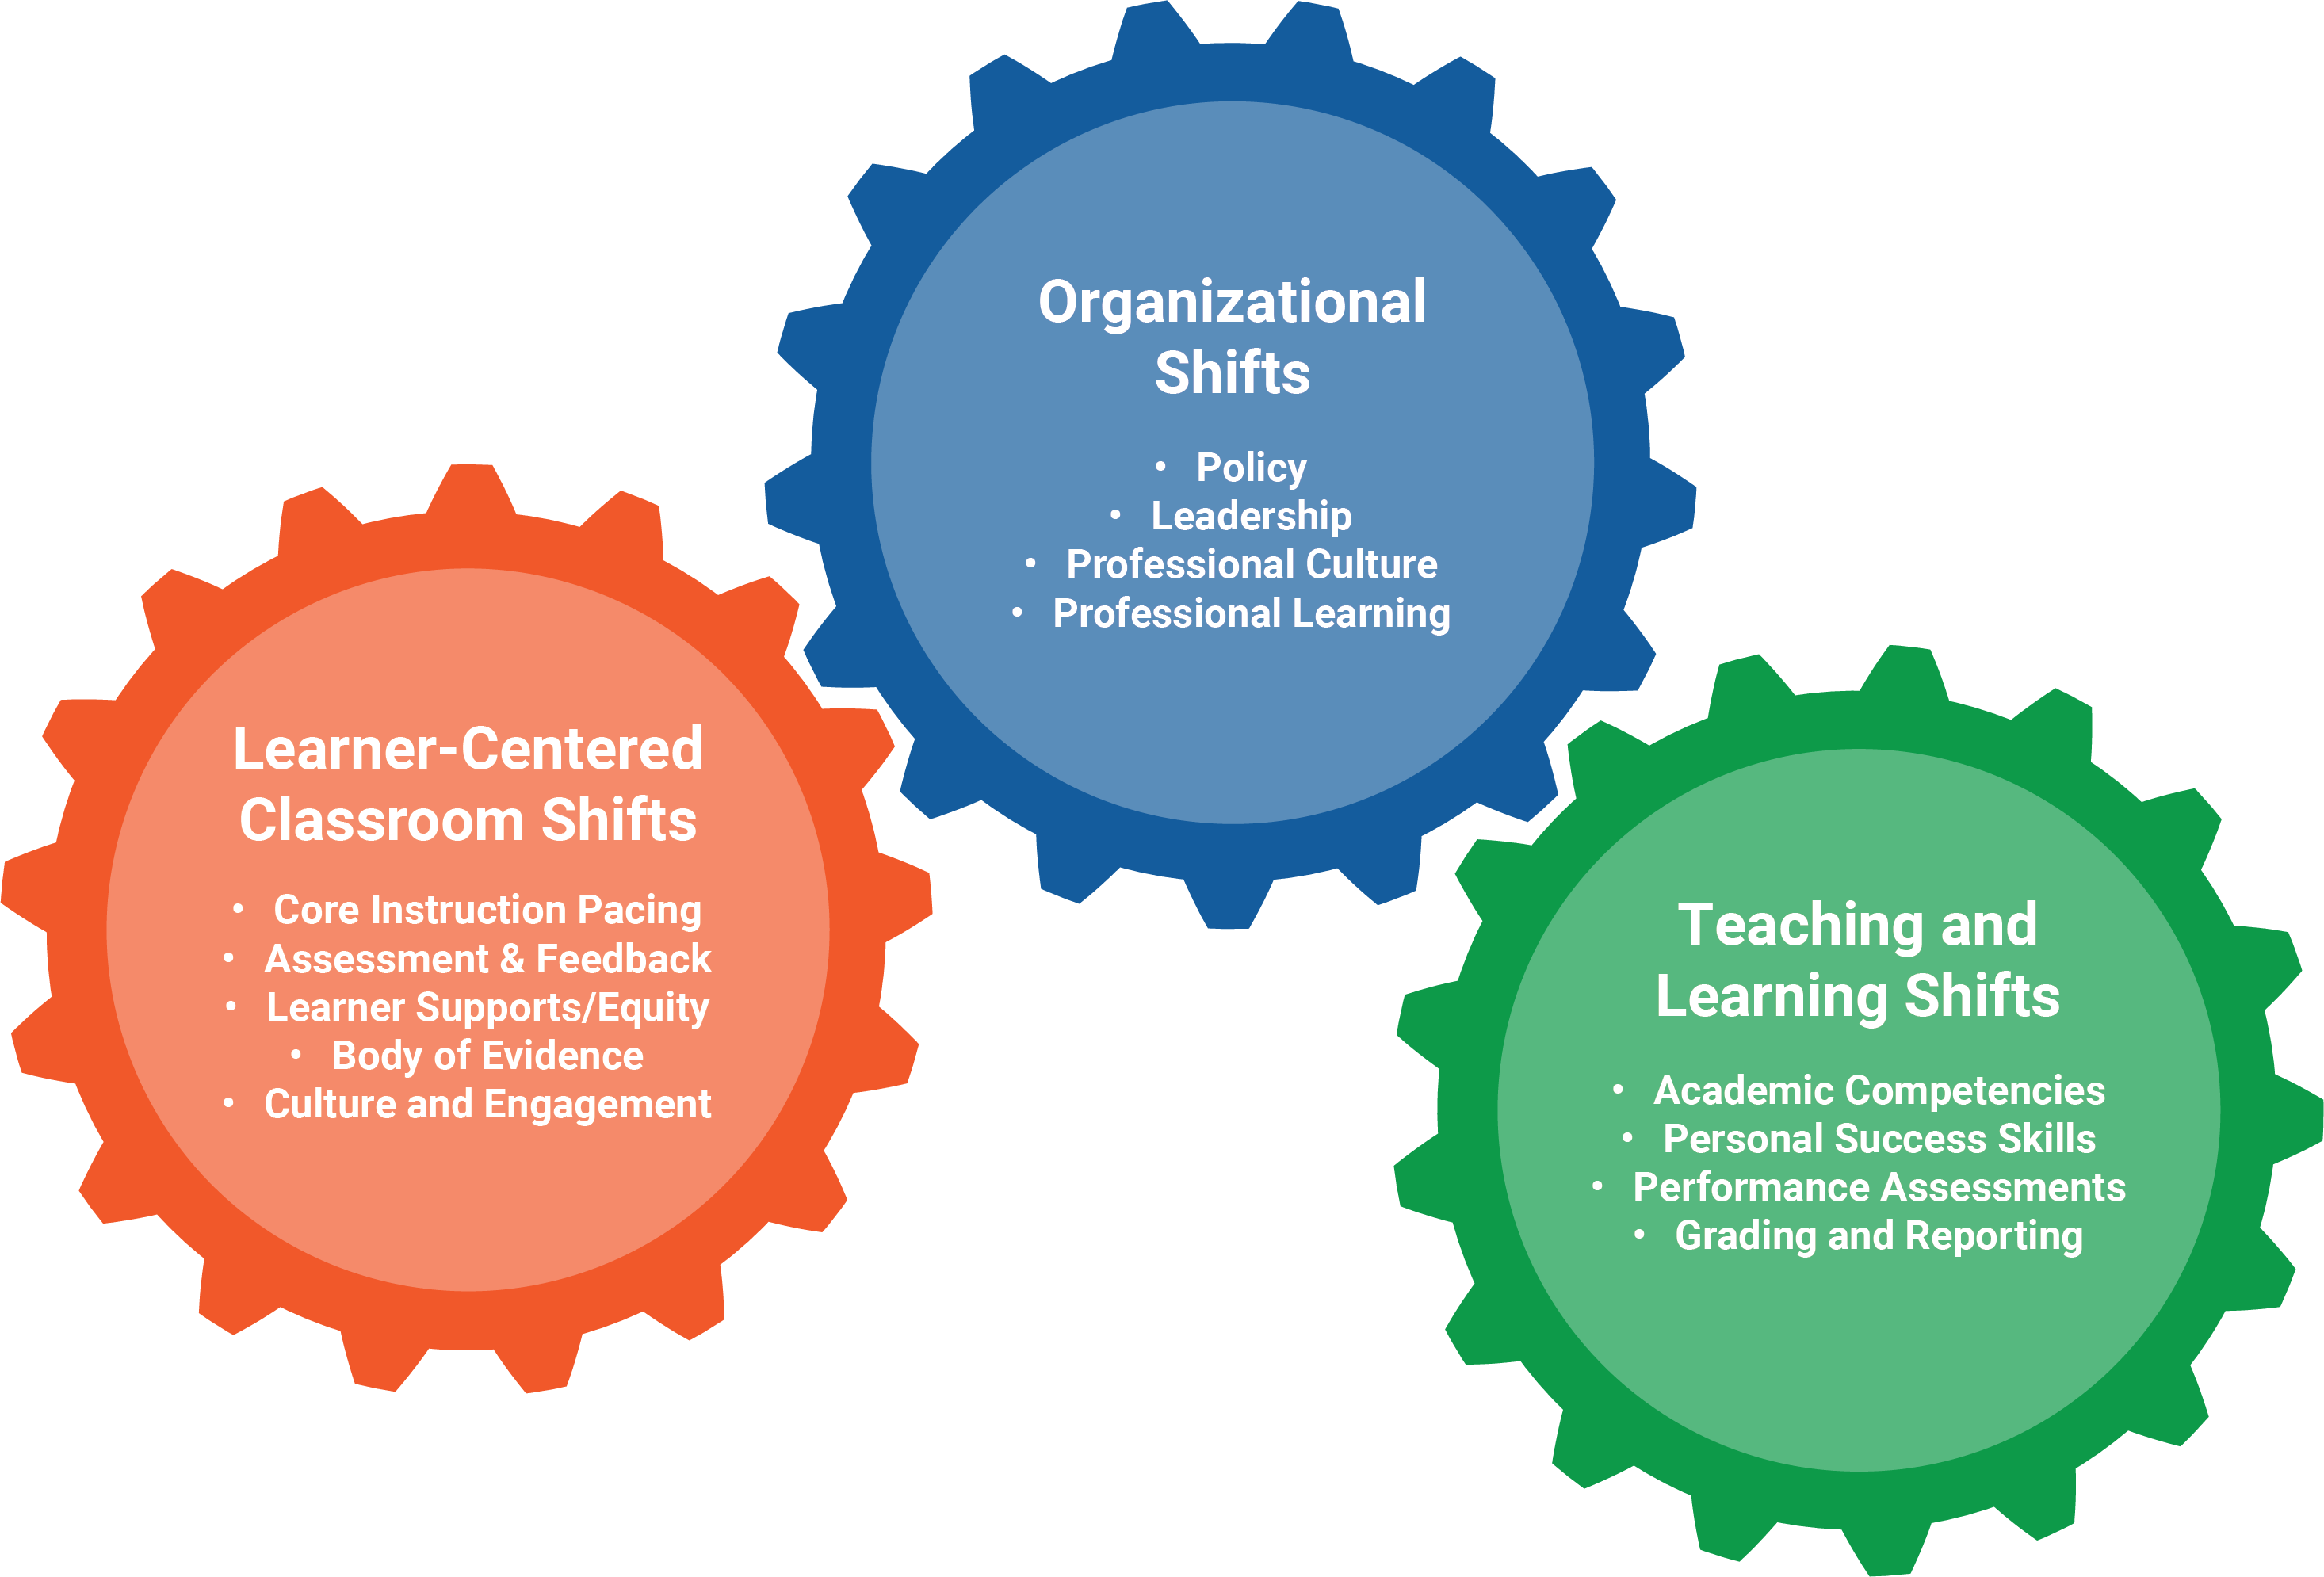 Student Centered Organizational Shifts Learning Shifts